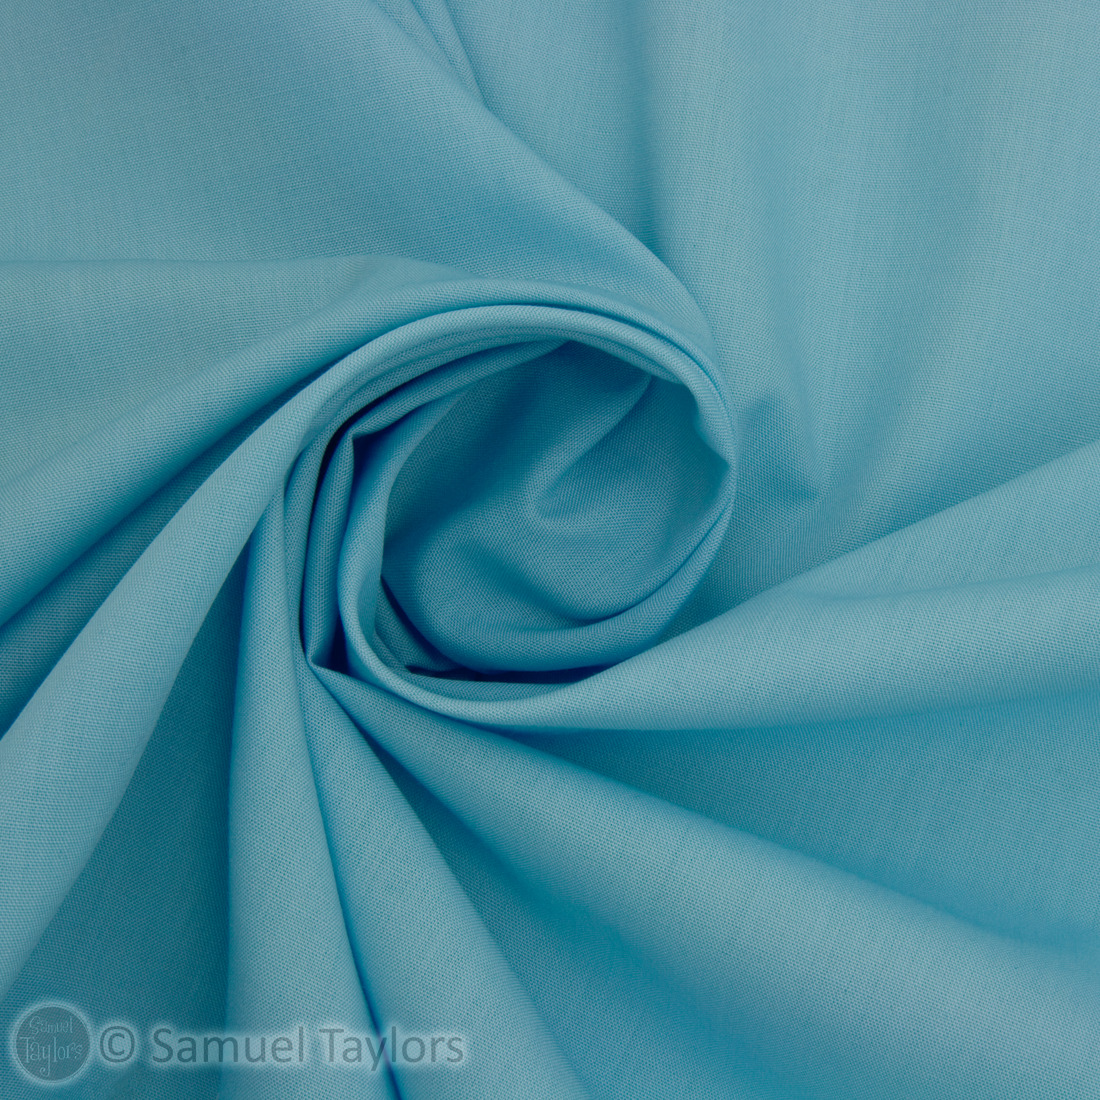 /images/product-images/2020images/FashionFabric/OddsAndEnds/2020Old/pyc-038turquoise.jpg